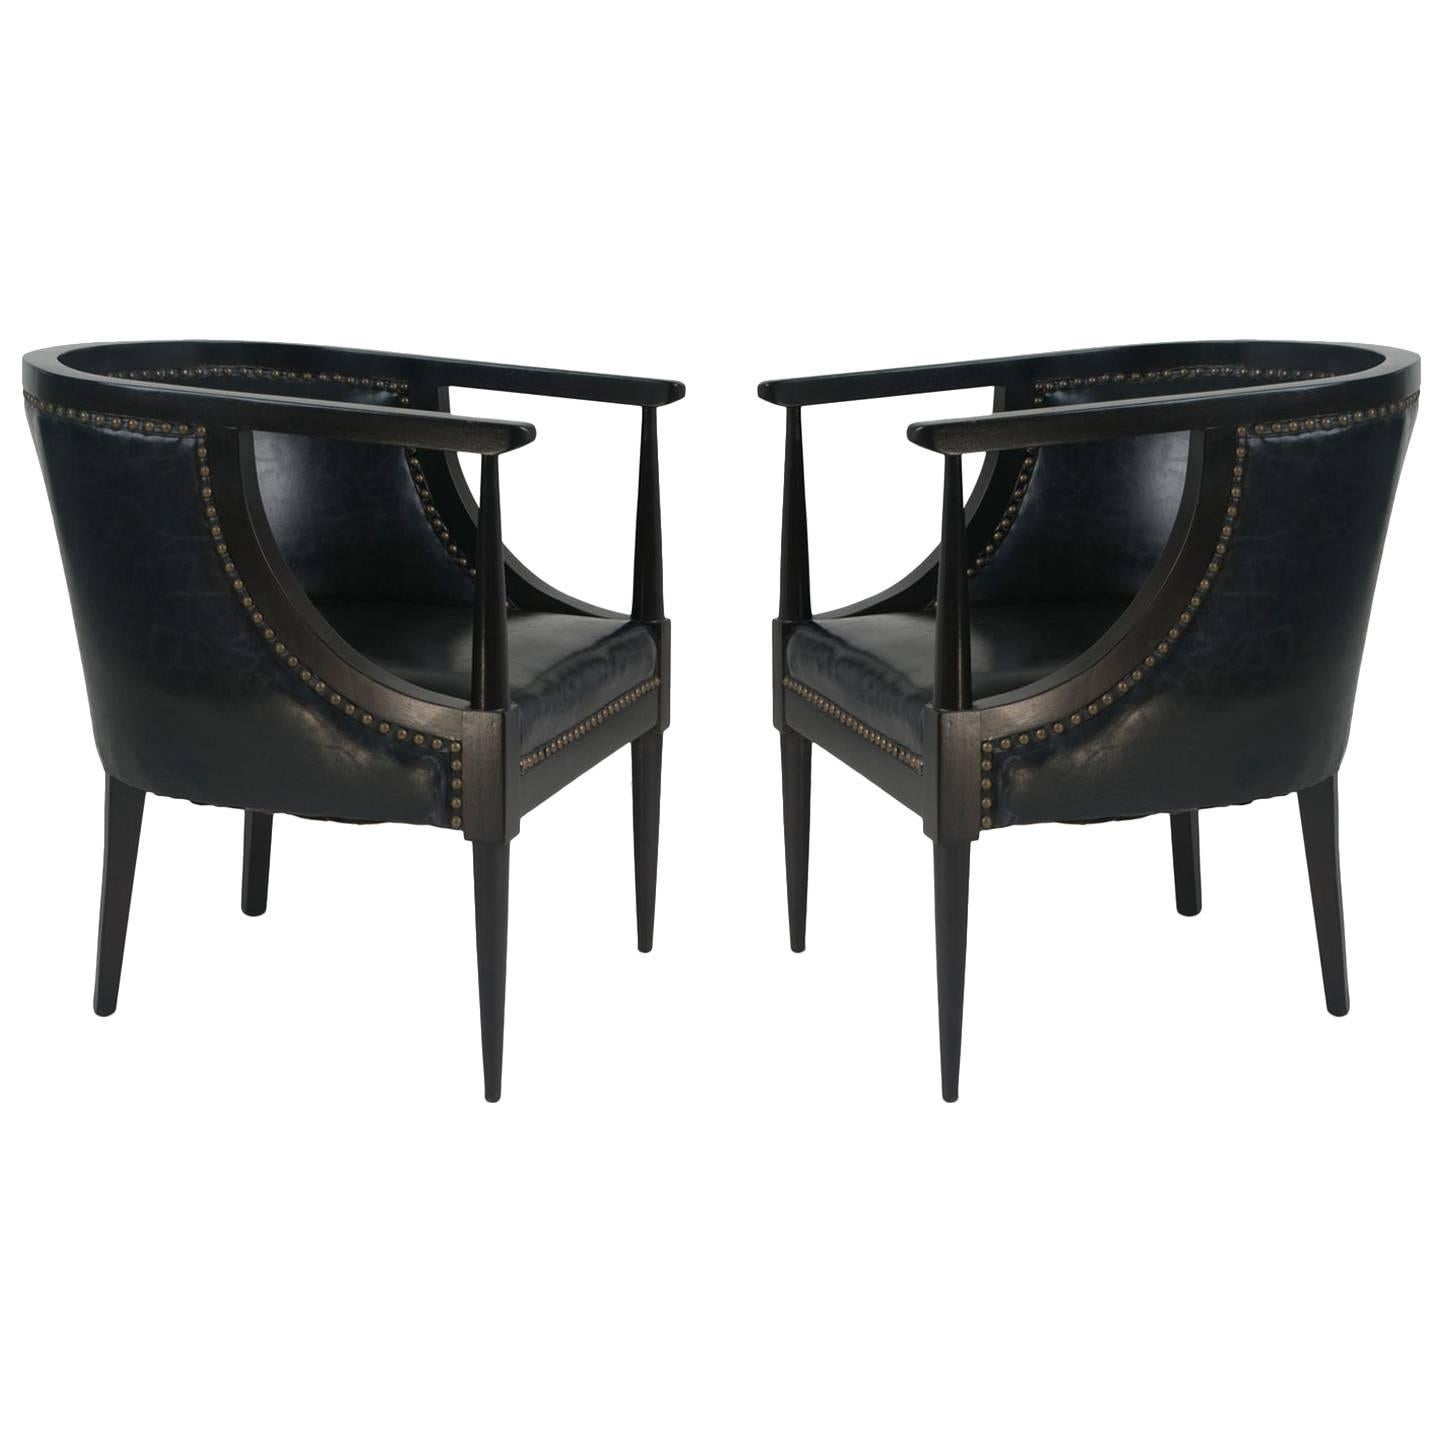 Black Leather Club Chairs with Bronze Nail Heads, Pair